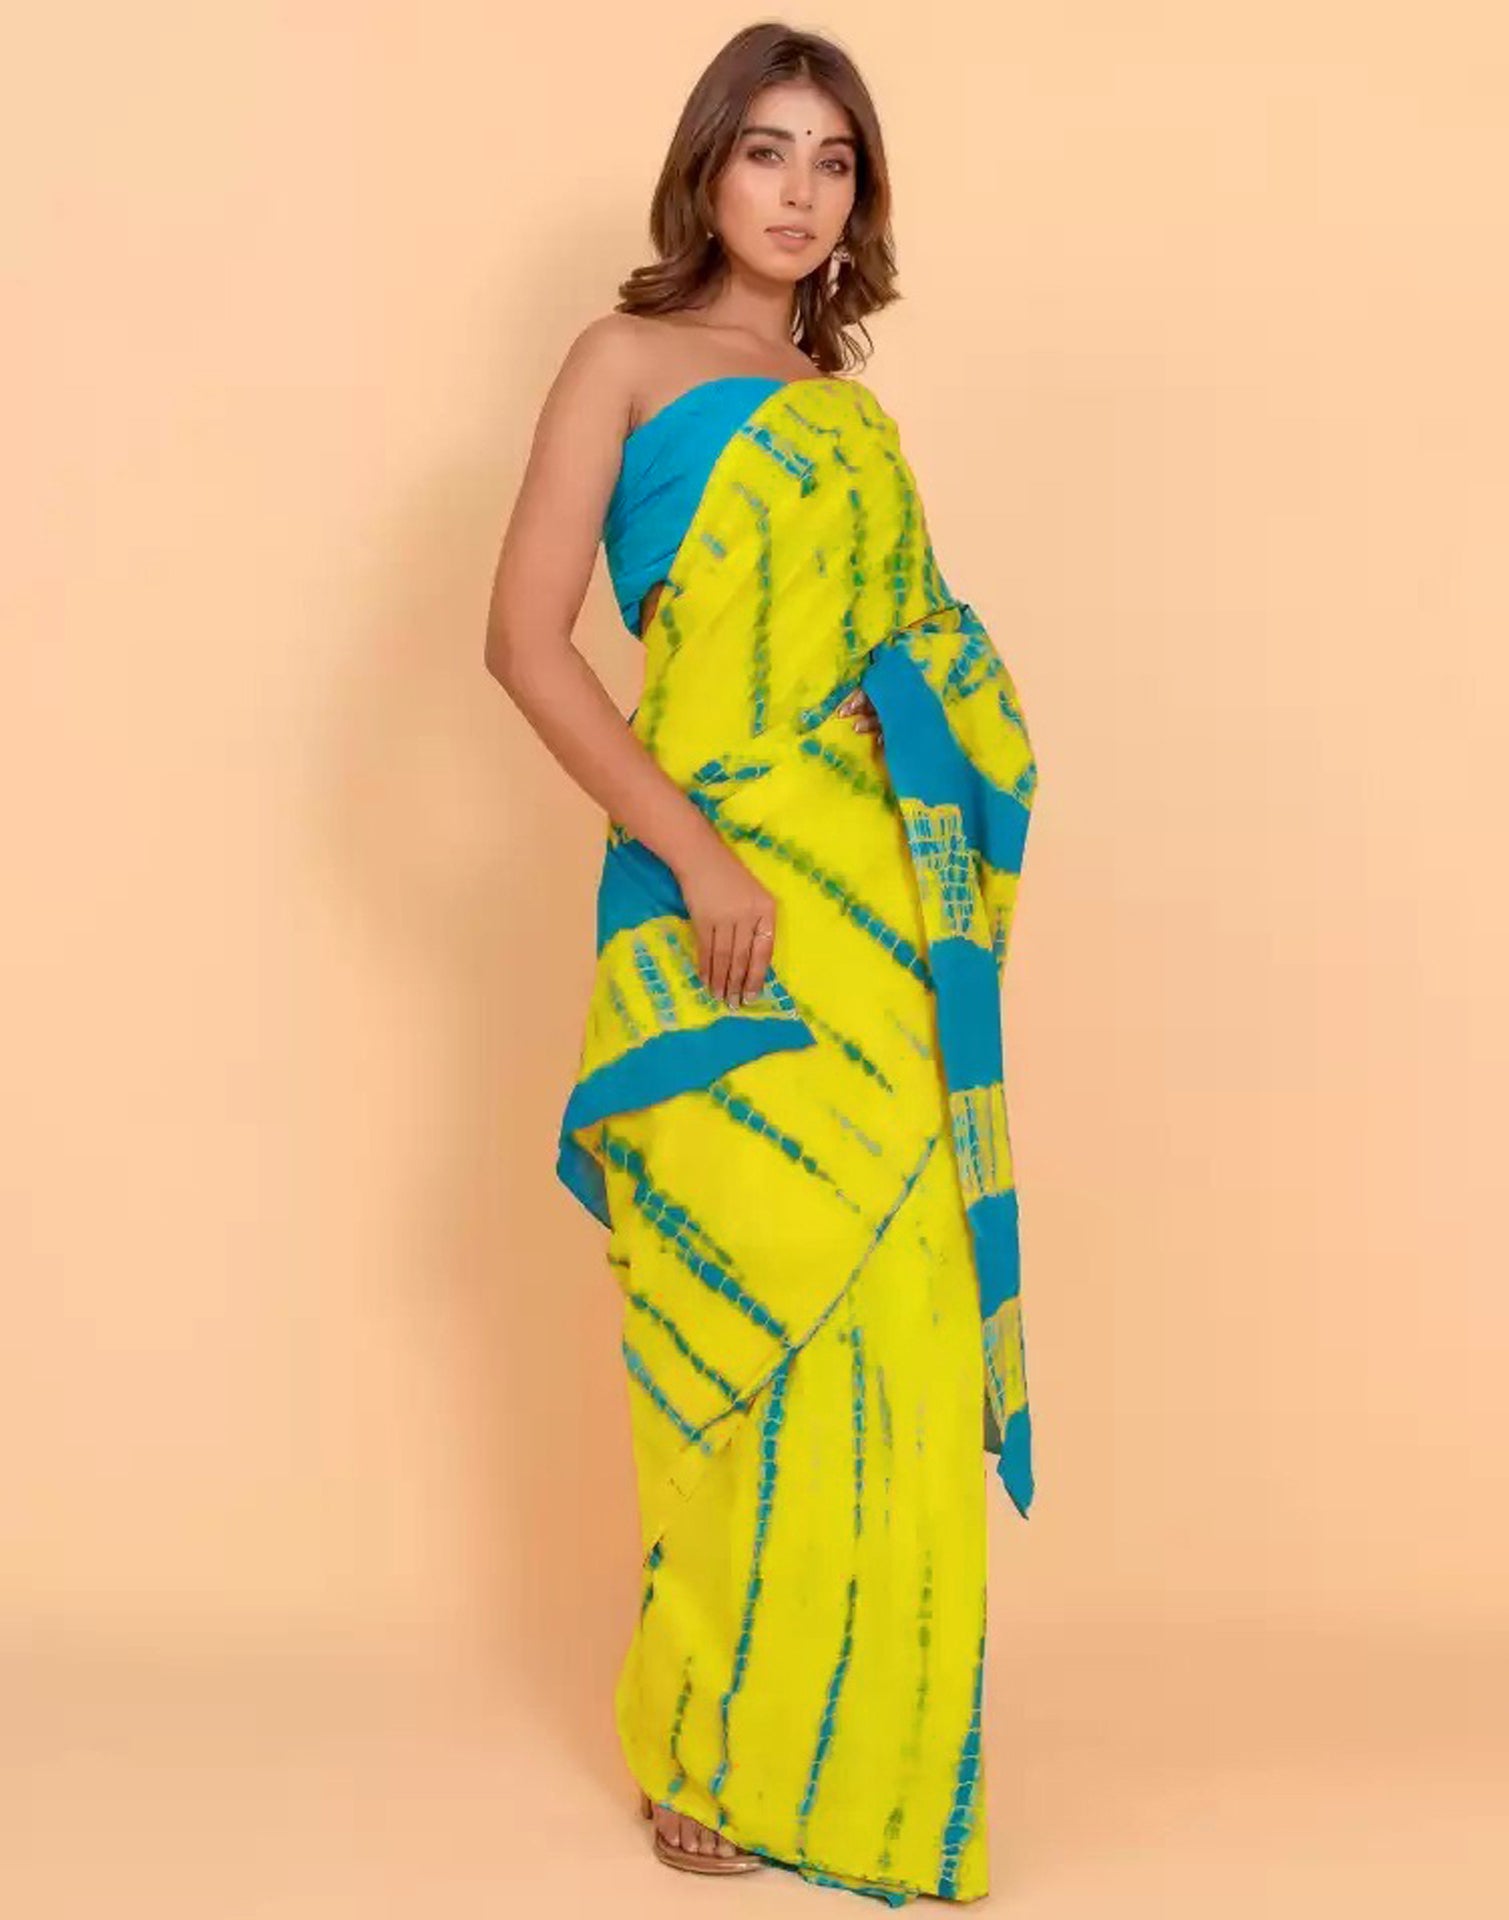 Buy Via East Pink & White Pure Linen Tie-Dye Saree at Redfynd